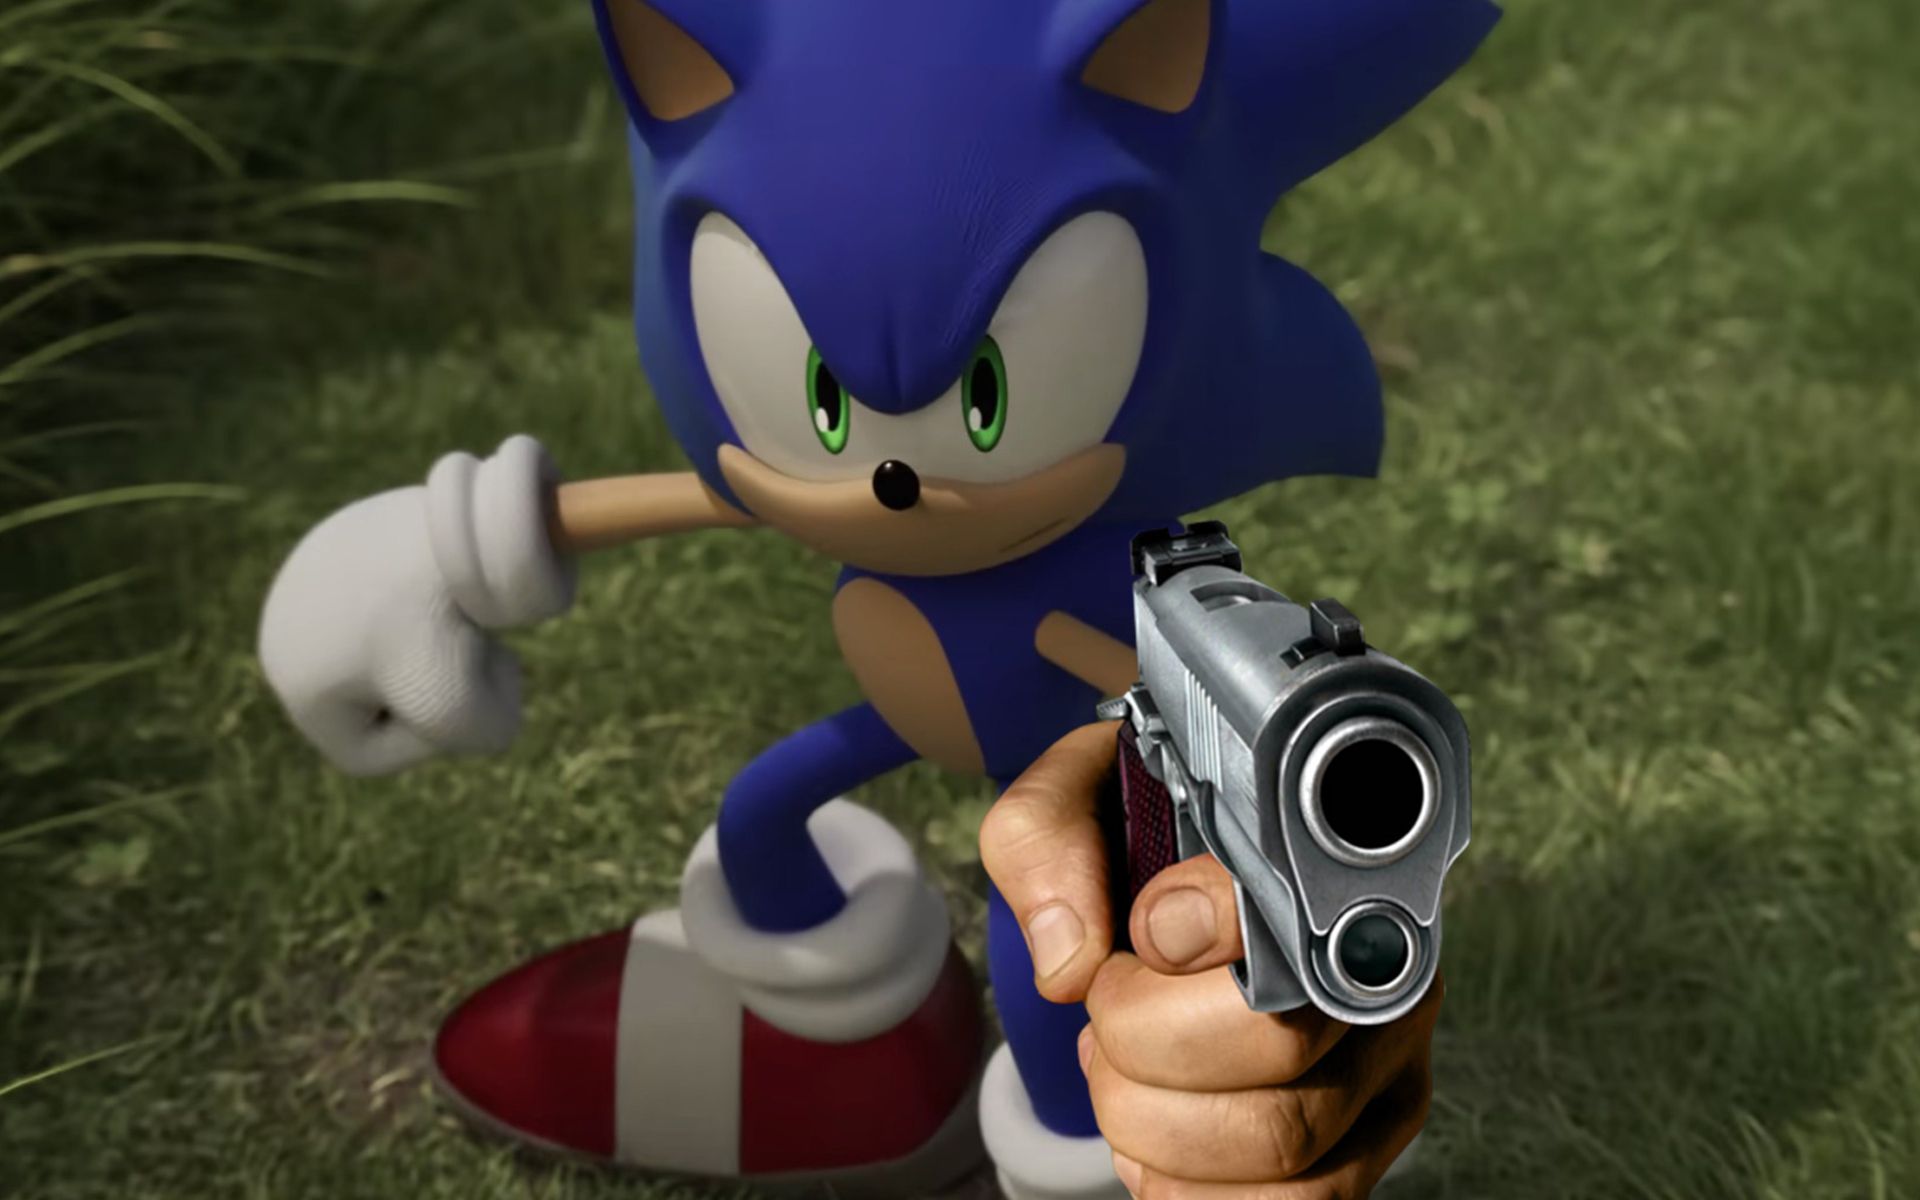 Sonic Cursed images. Hedgehog Weapon. Shadow Kill Sonic. Curse sonic